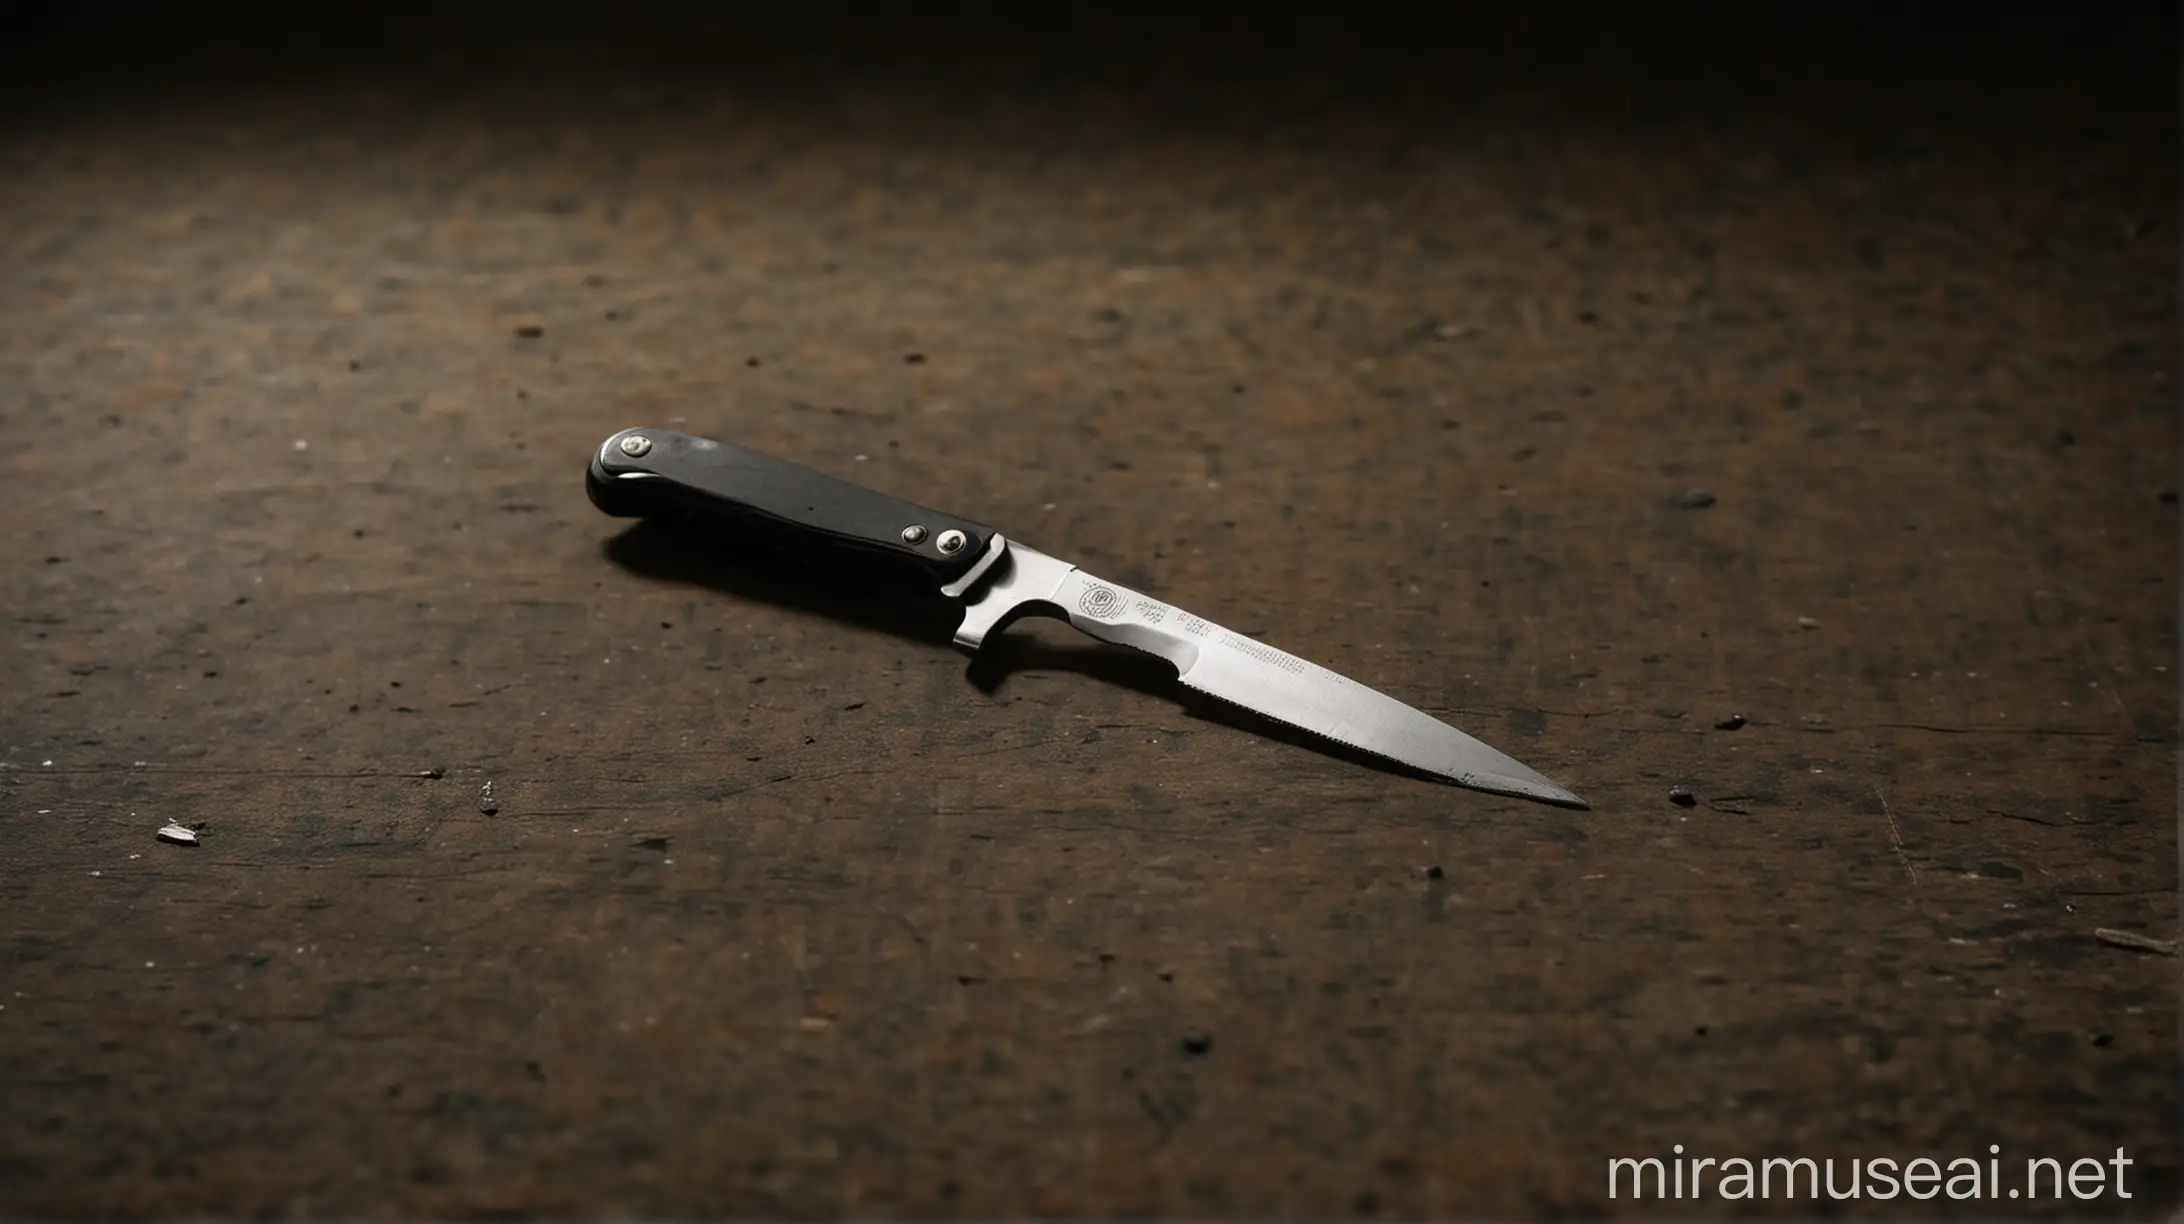 Sharp Knife on Dark Floor Eerie DSLR Photography with Two Shadows